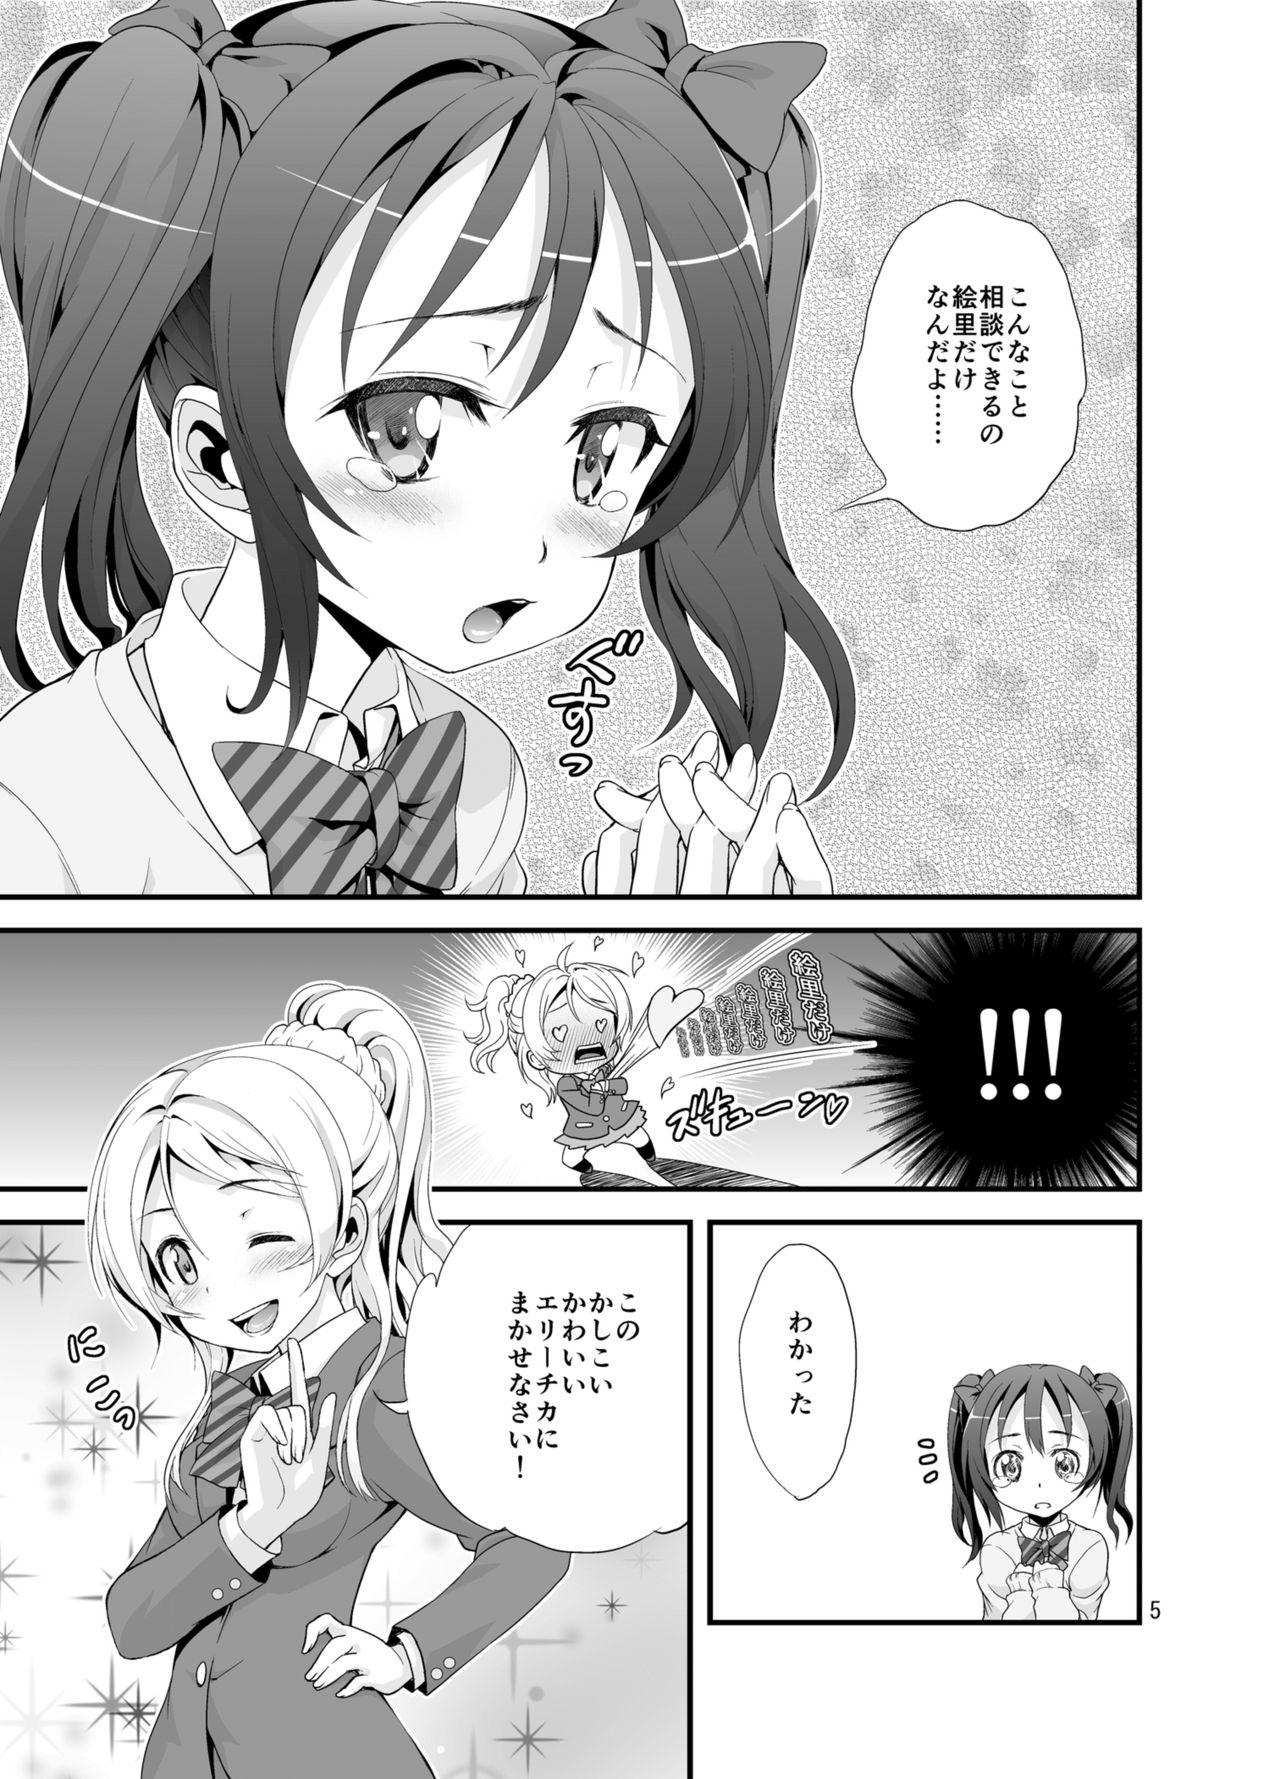 Sex Toys Nico-chin. - Love live Dominant - Page 5